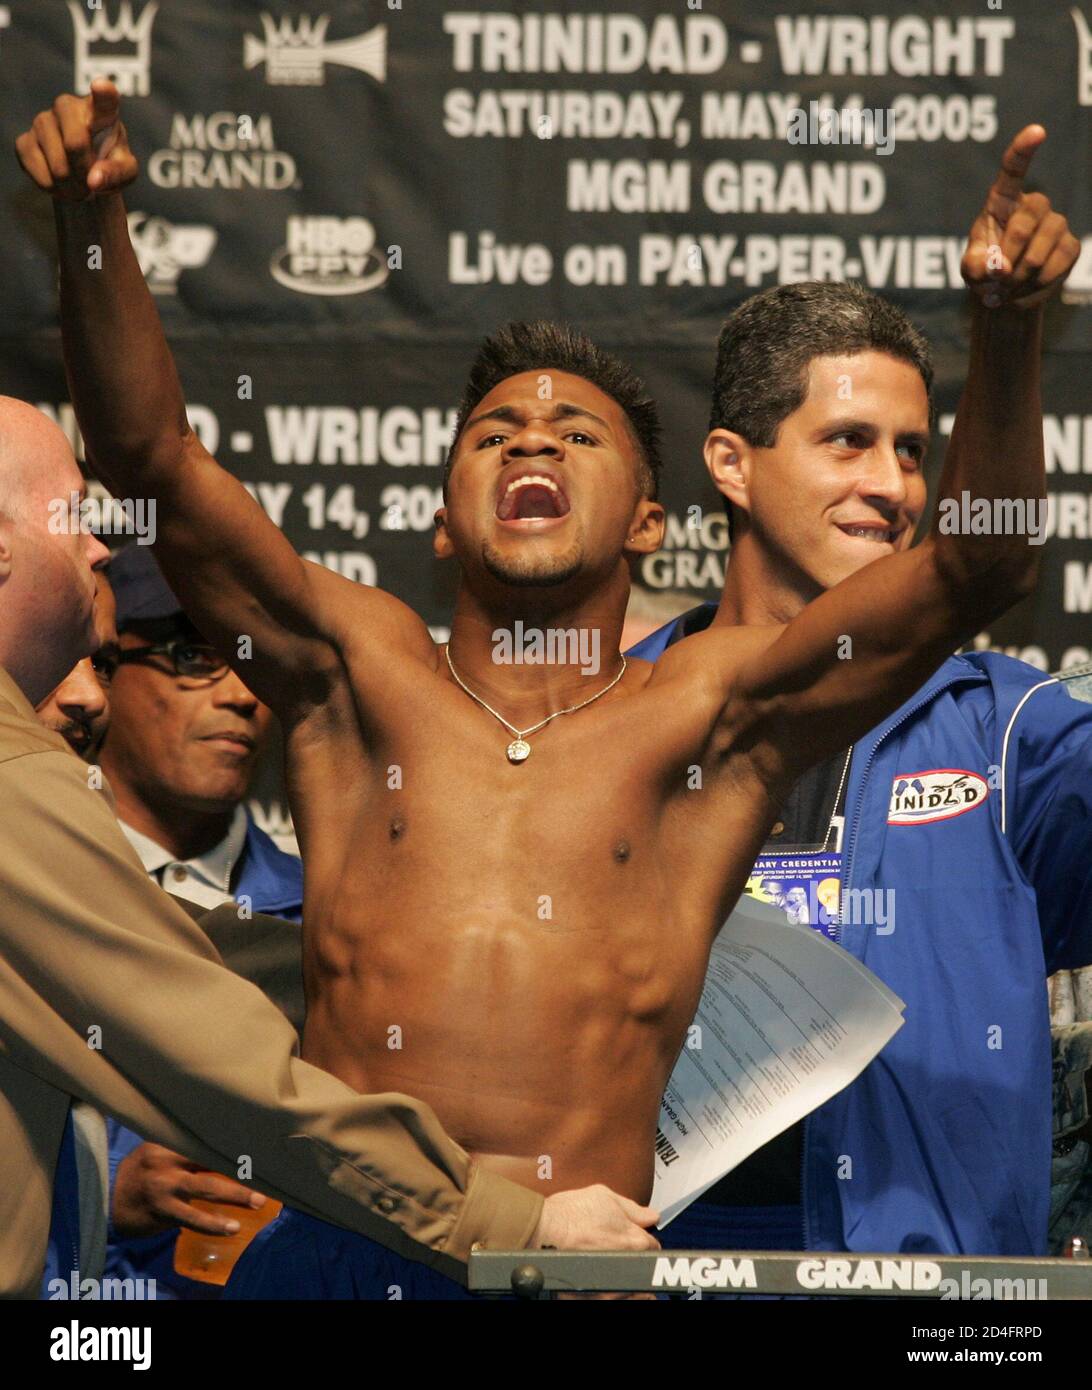 Middleweight boxer Felix "Tito" Trinidad of Cupey Alto, Puerto Rico yells to fans during an official weigh-in at the MGM Grand Garden Arena in Las Vegas, Nevada May 13, 2005. Trinidad (42-1) takes on Winky Wright (48-3) of St. Petersburg, Florida in a 12-round WBC championship elimination bout at the arena May 14. Both fighters weighed the 160 pound limit. REUTERS/Steve Marcus  SM/SV Stock Photo